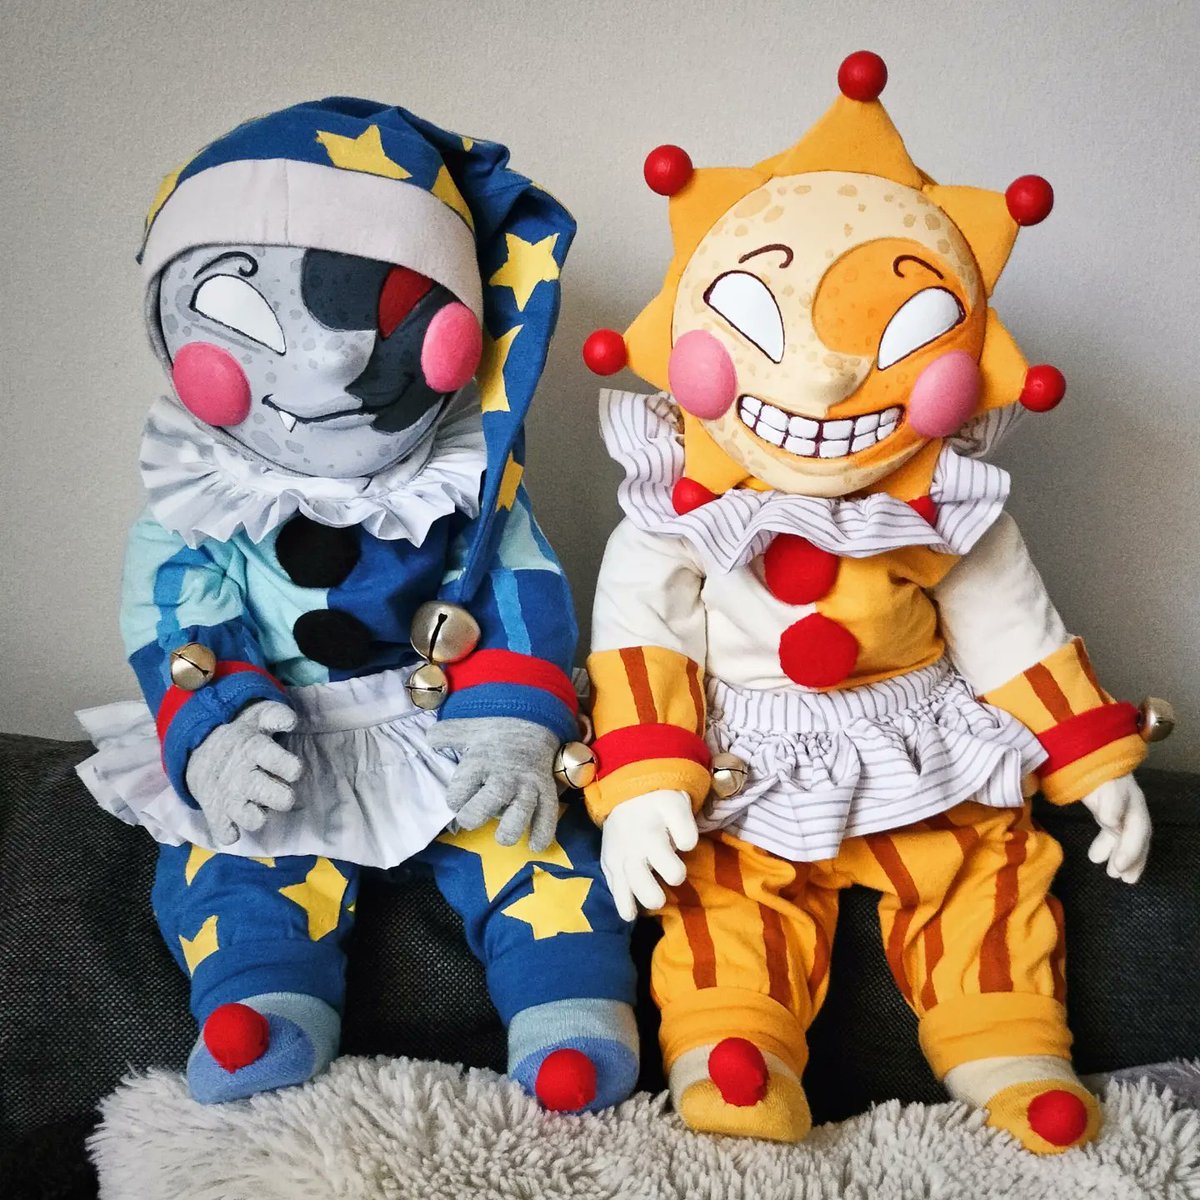 Well, would you look at us-

Ready for MCM Comic Con London! 
We hope to see @kellengoff there!

// Yes, the dolls are finally done 💕

#dolldrops #sundrop #moondrop